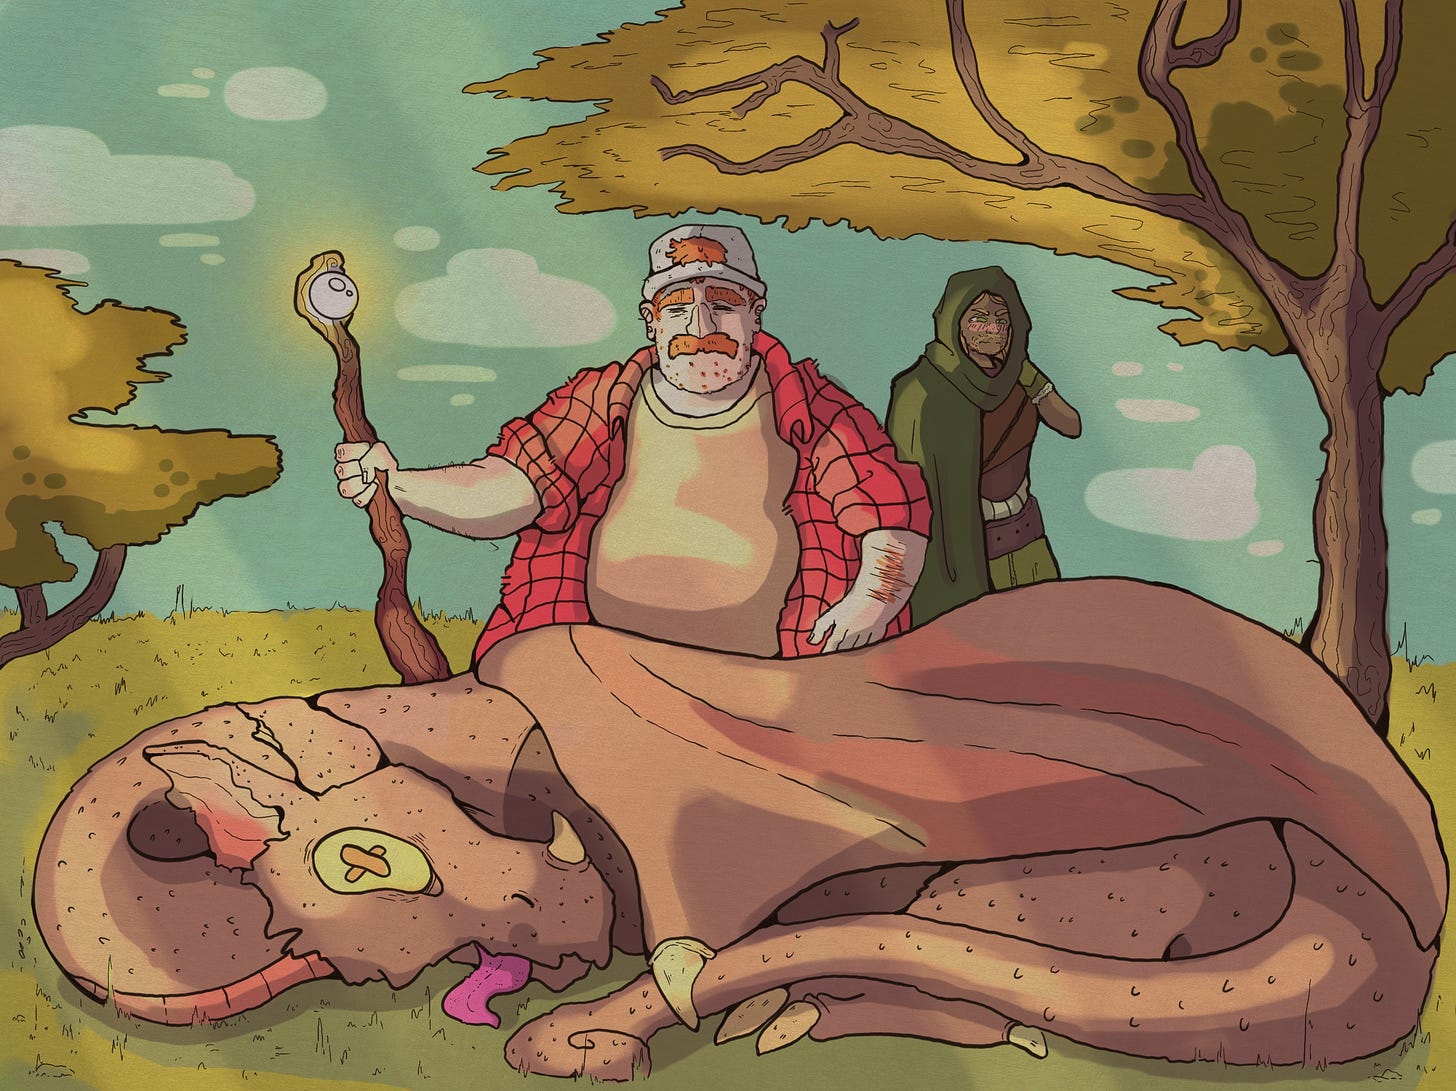 Illustration of a slobby Earth man posing with a dead dragon. The dragon's eye is a cartoony X to show that it's dead.